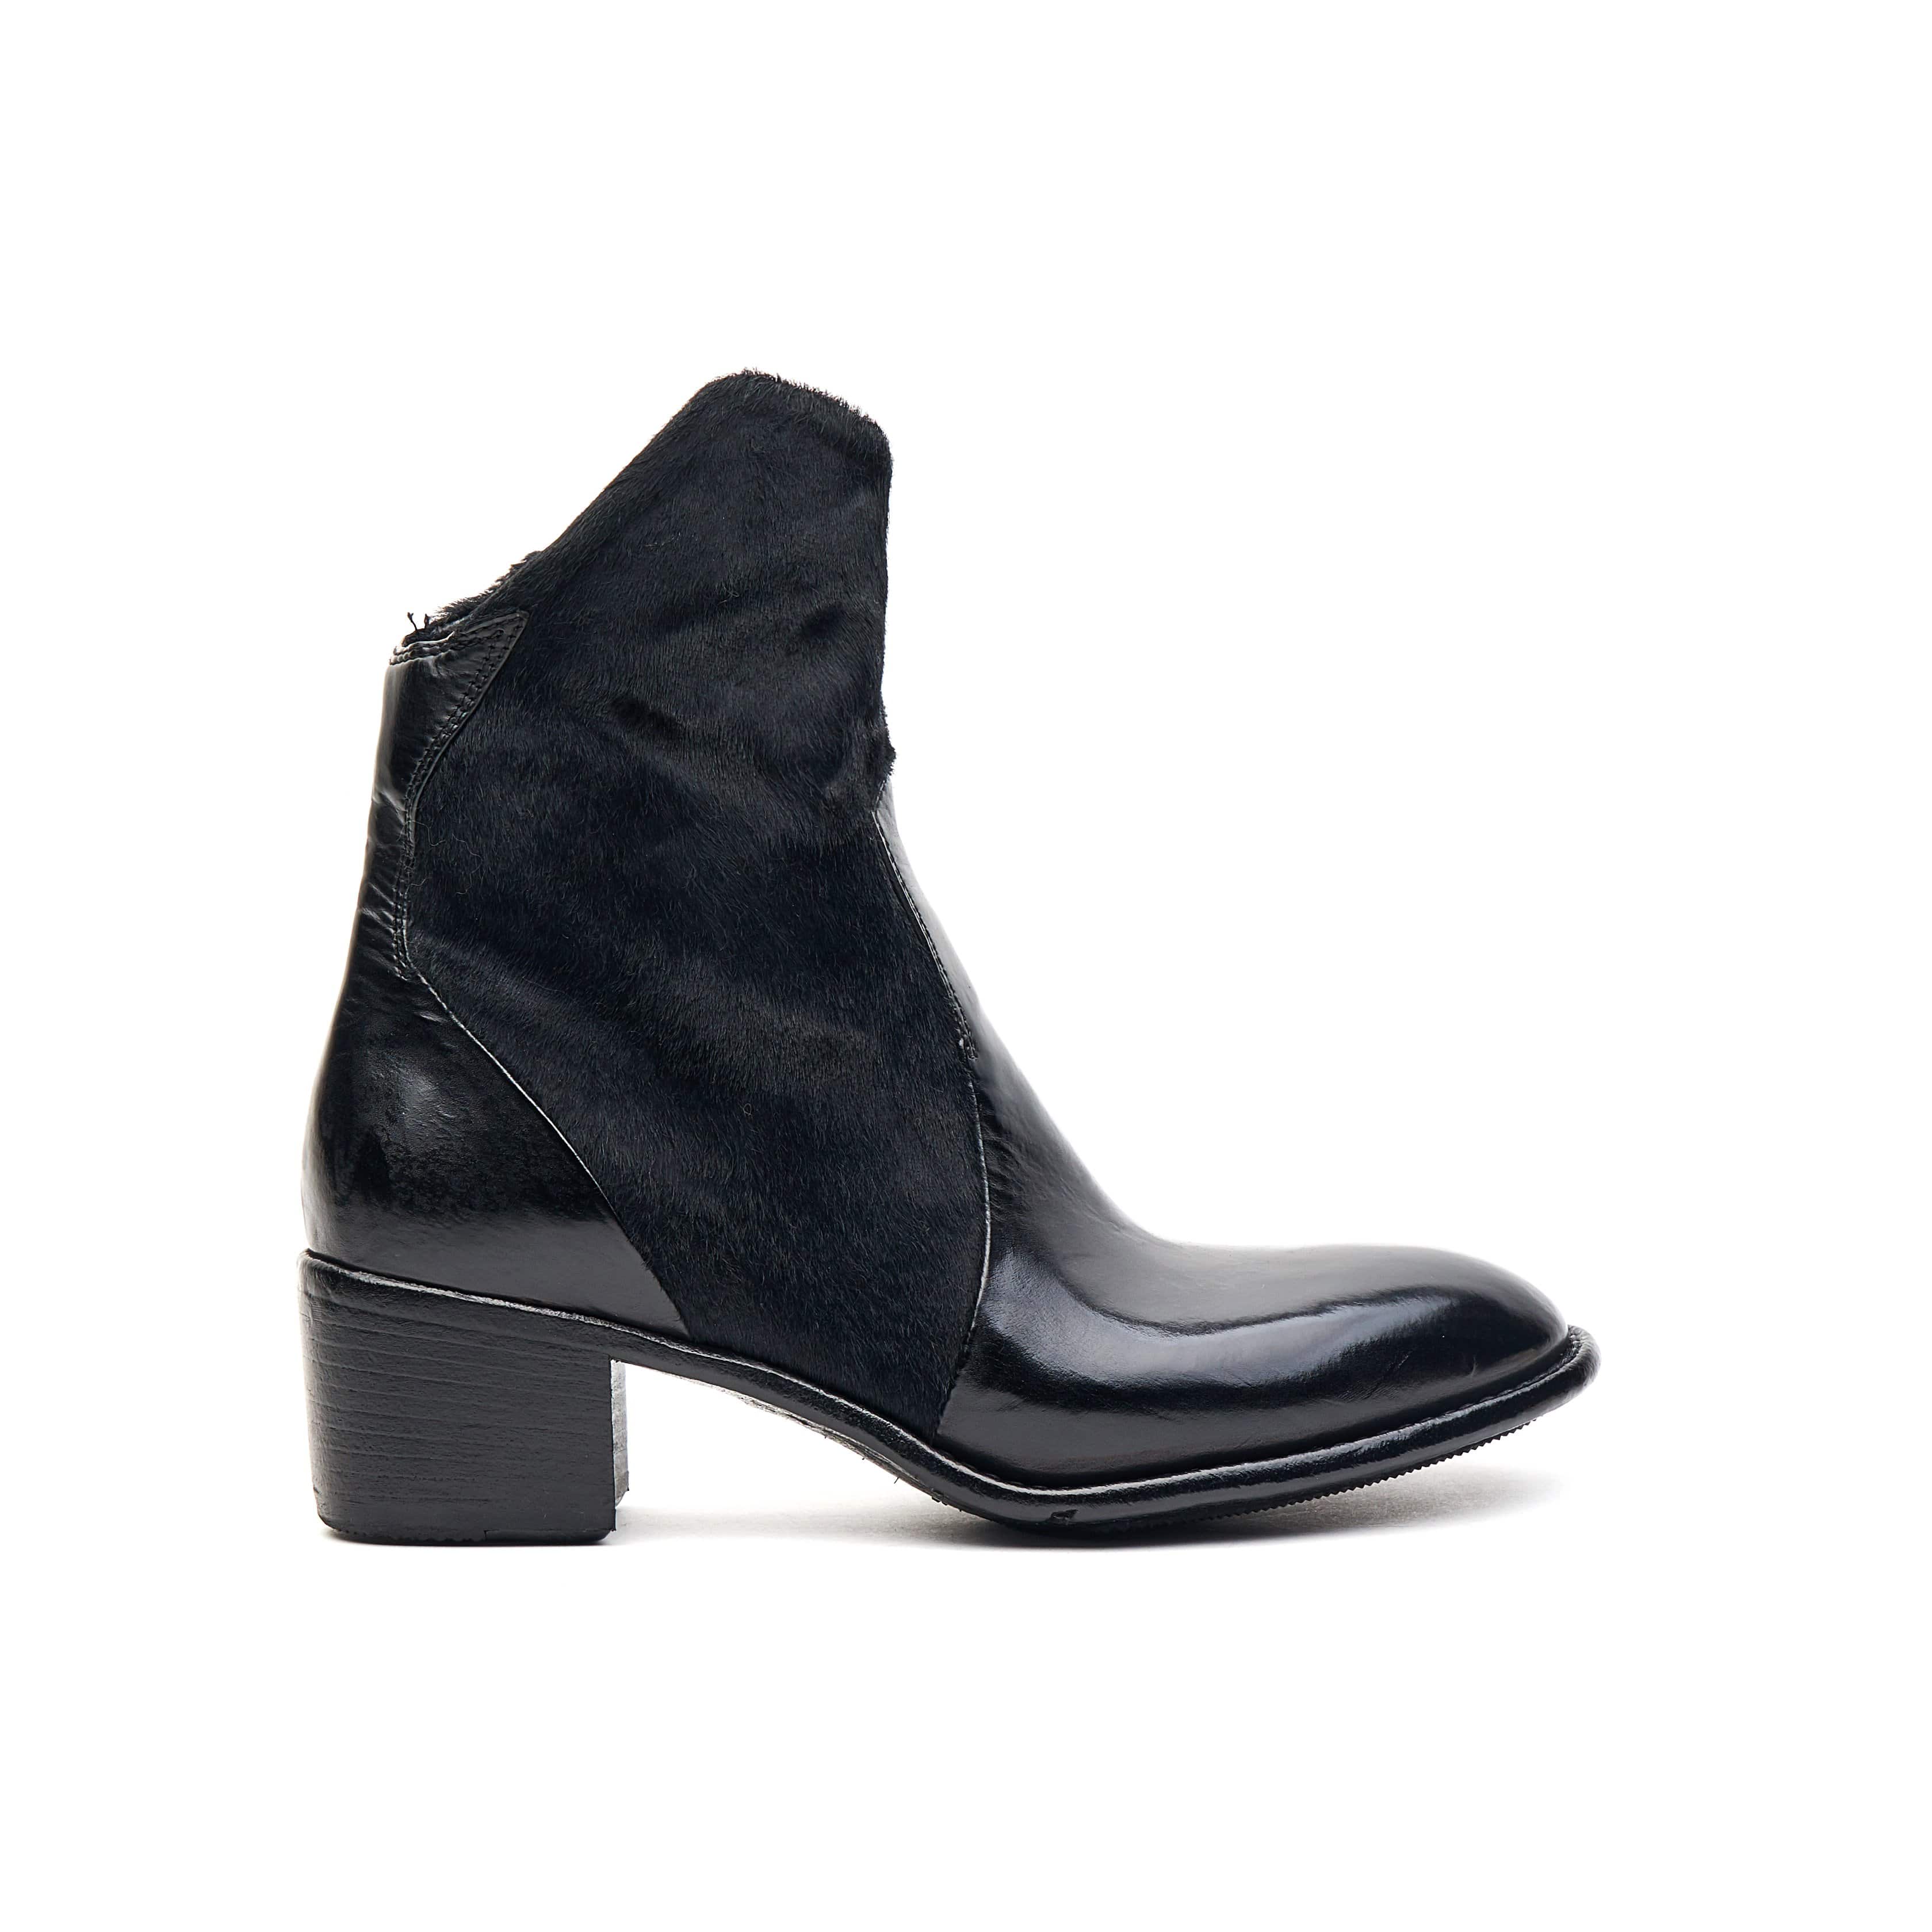 Lemargo AP12B Black Womens Ankle Boot - 124 Shoes